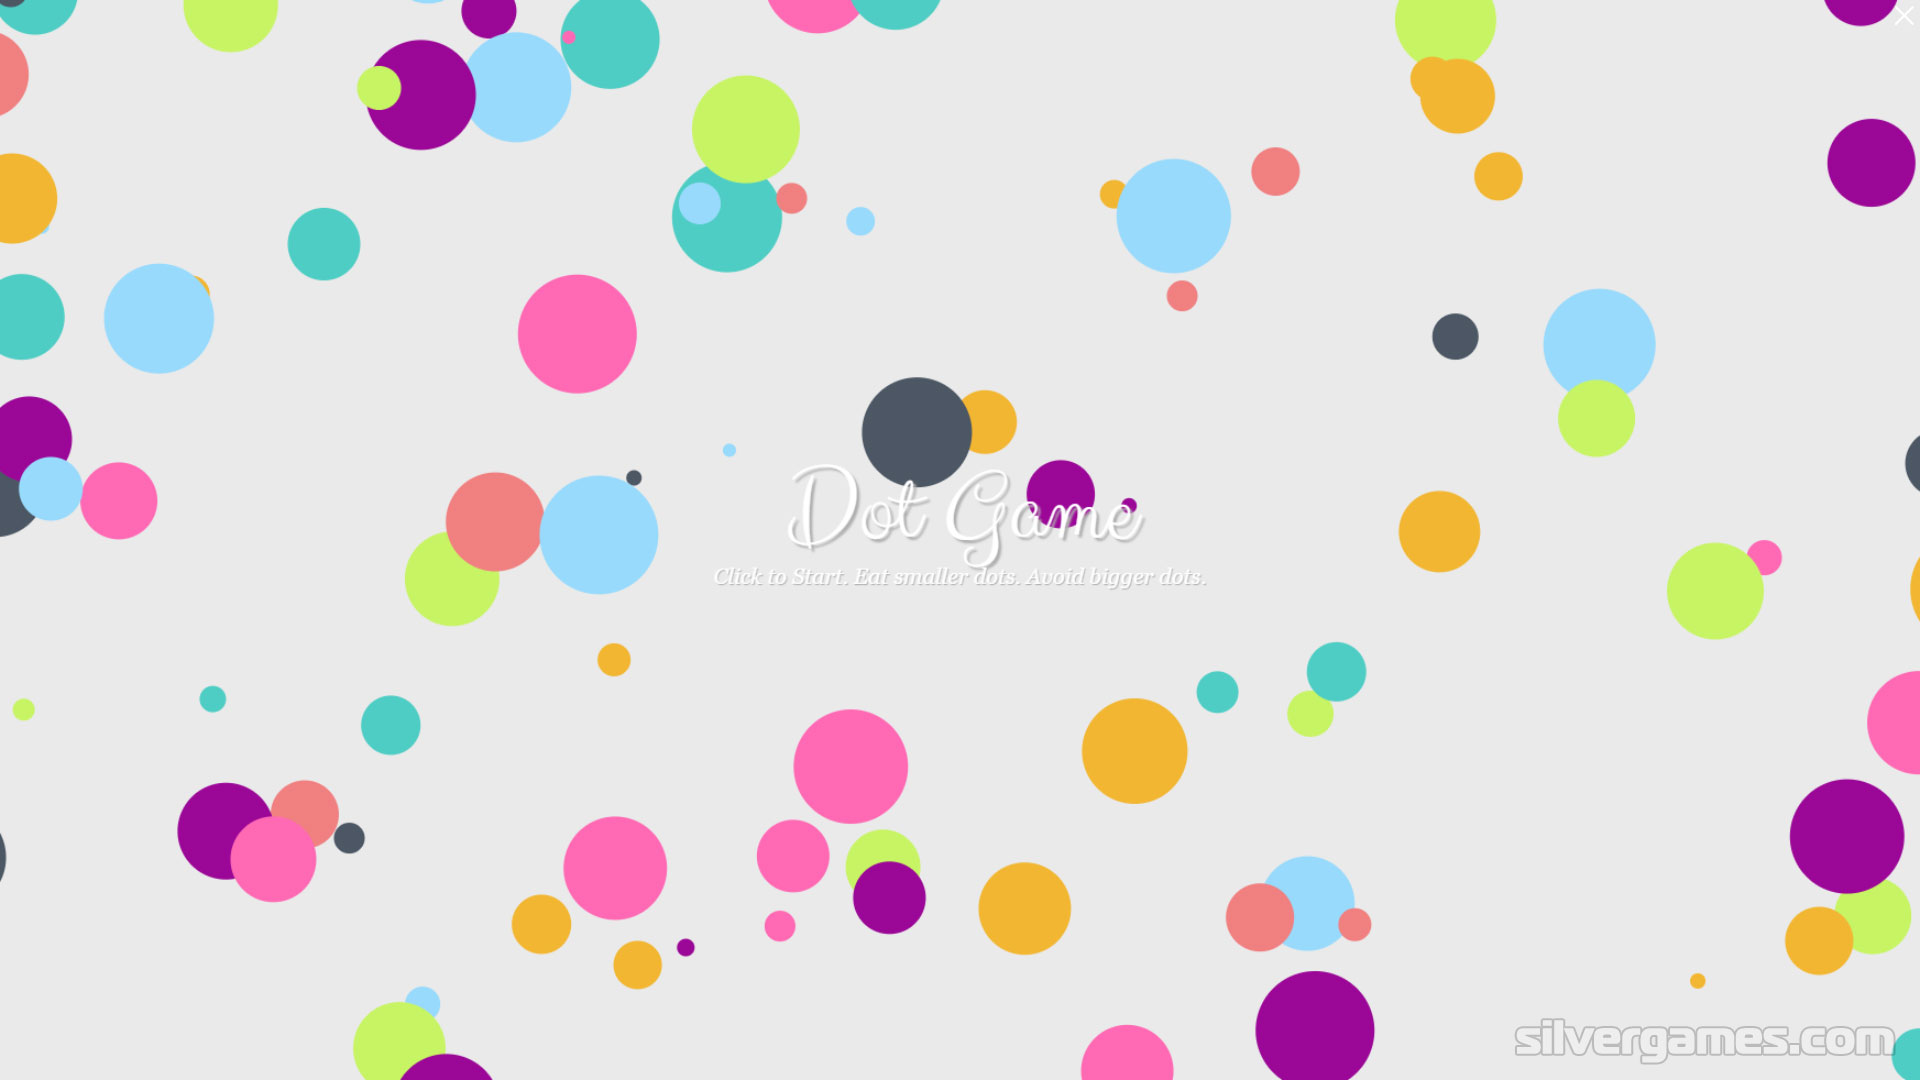 Dot Game Play The Best Dot Games Online